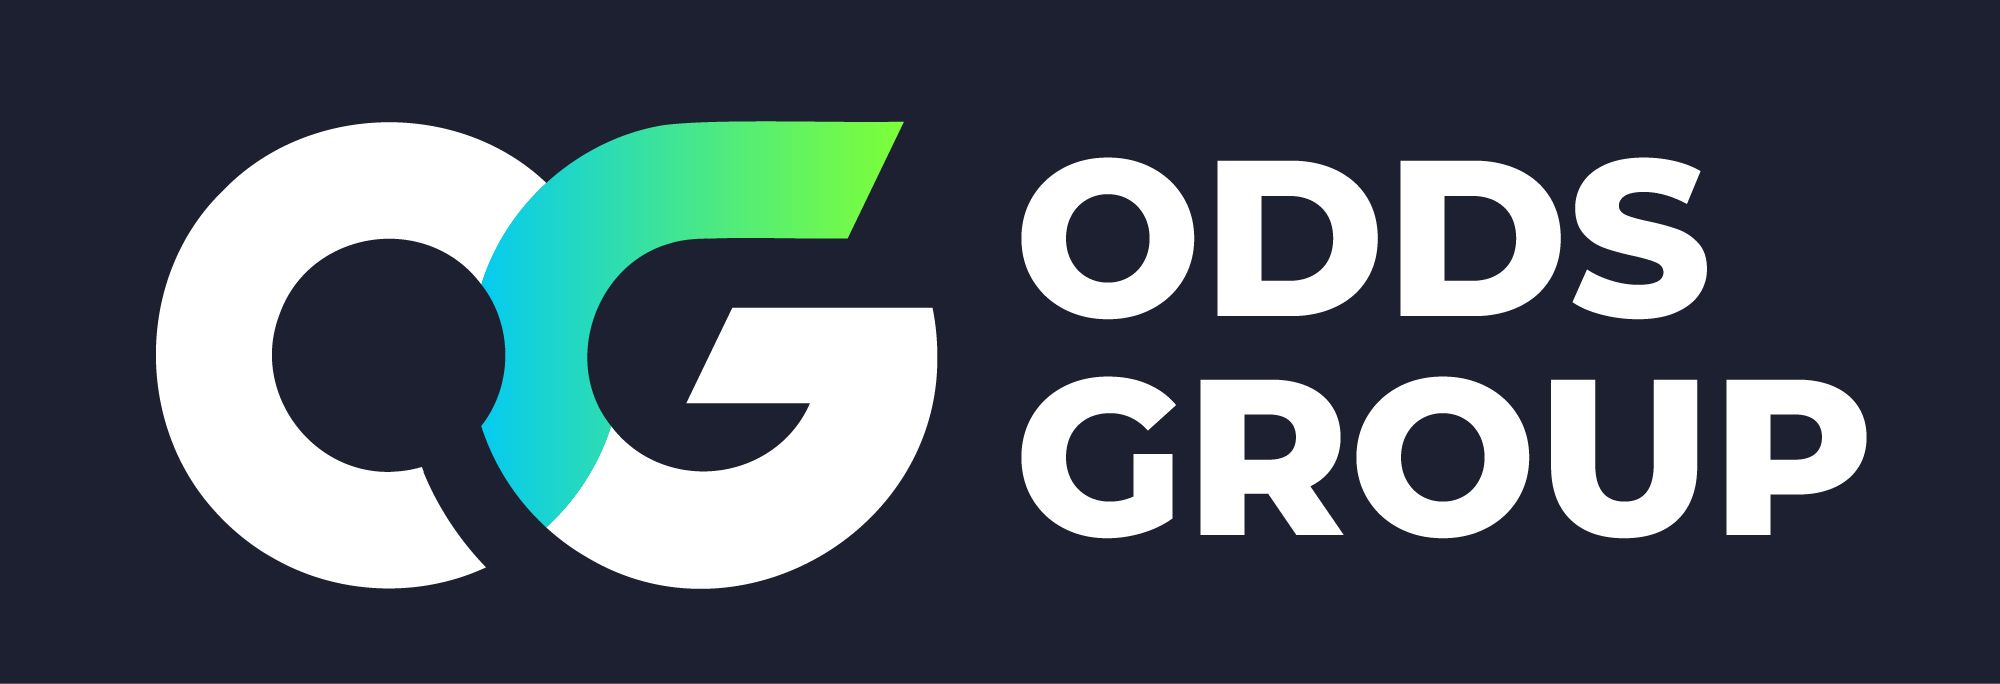 Odds Group